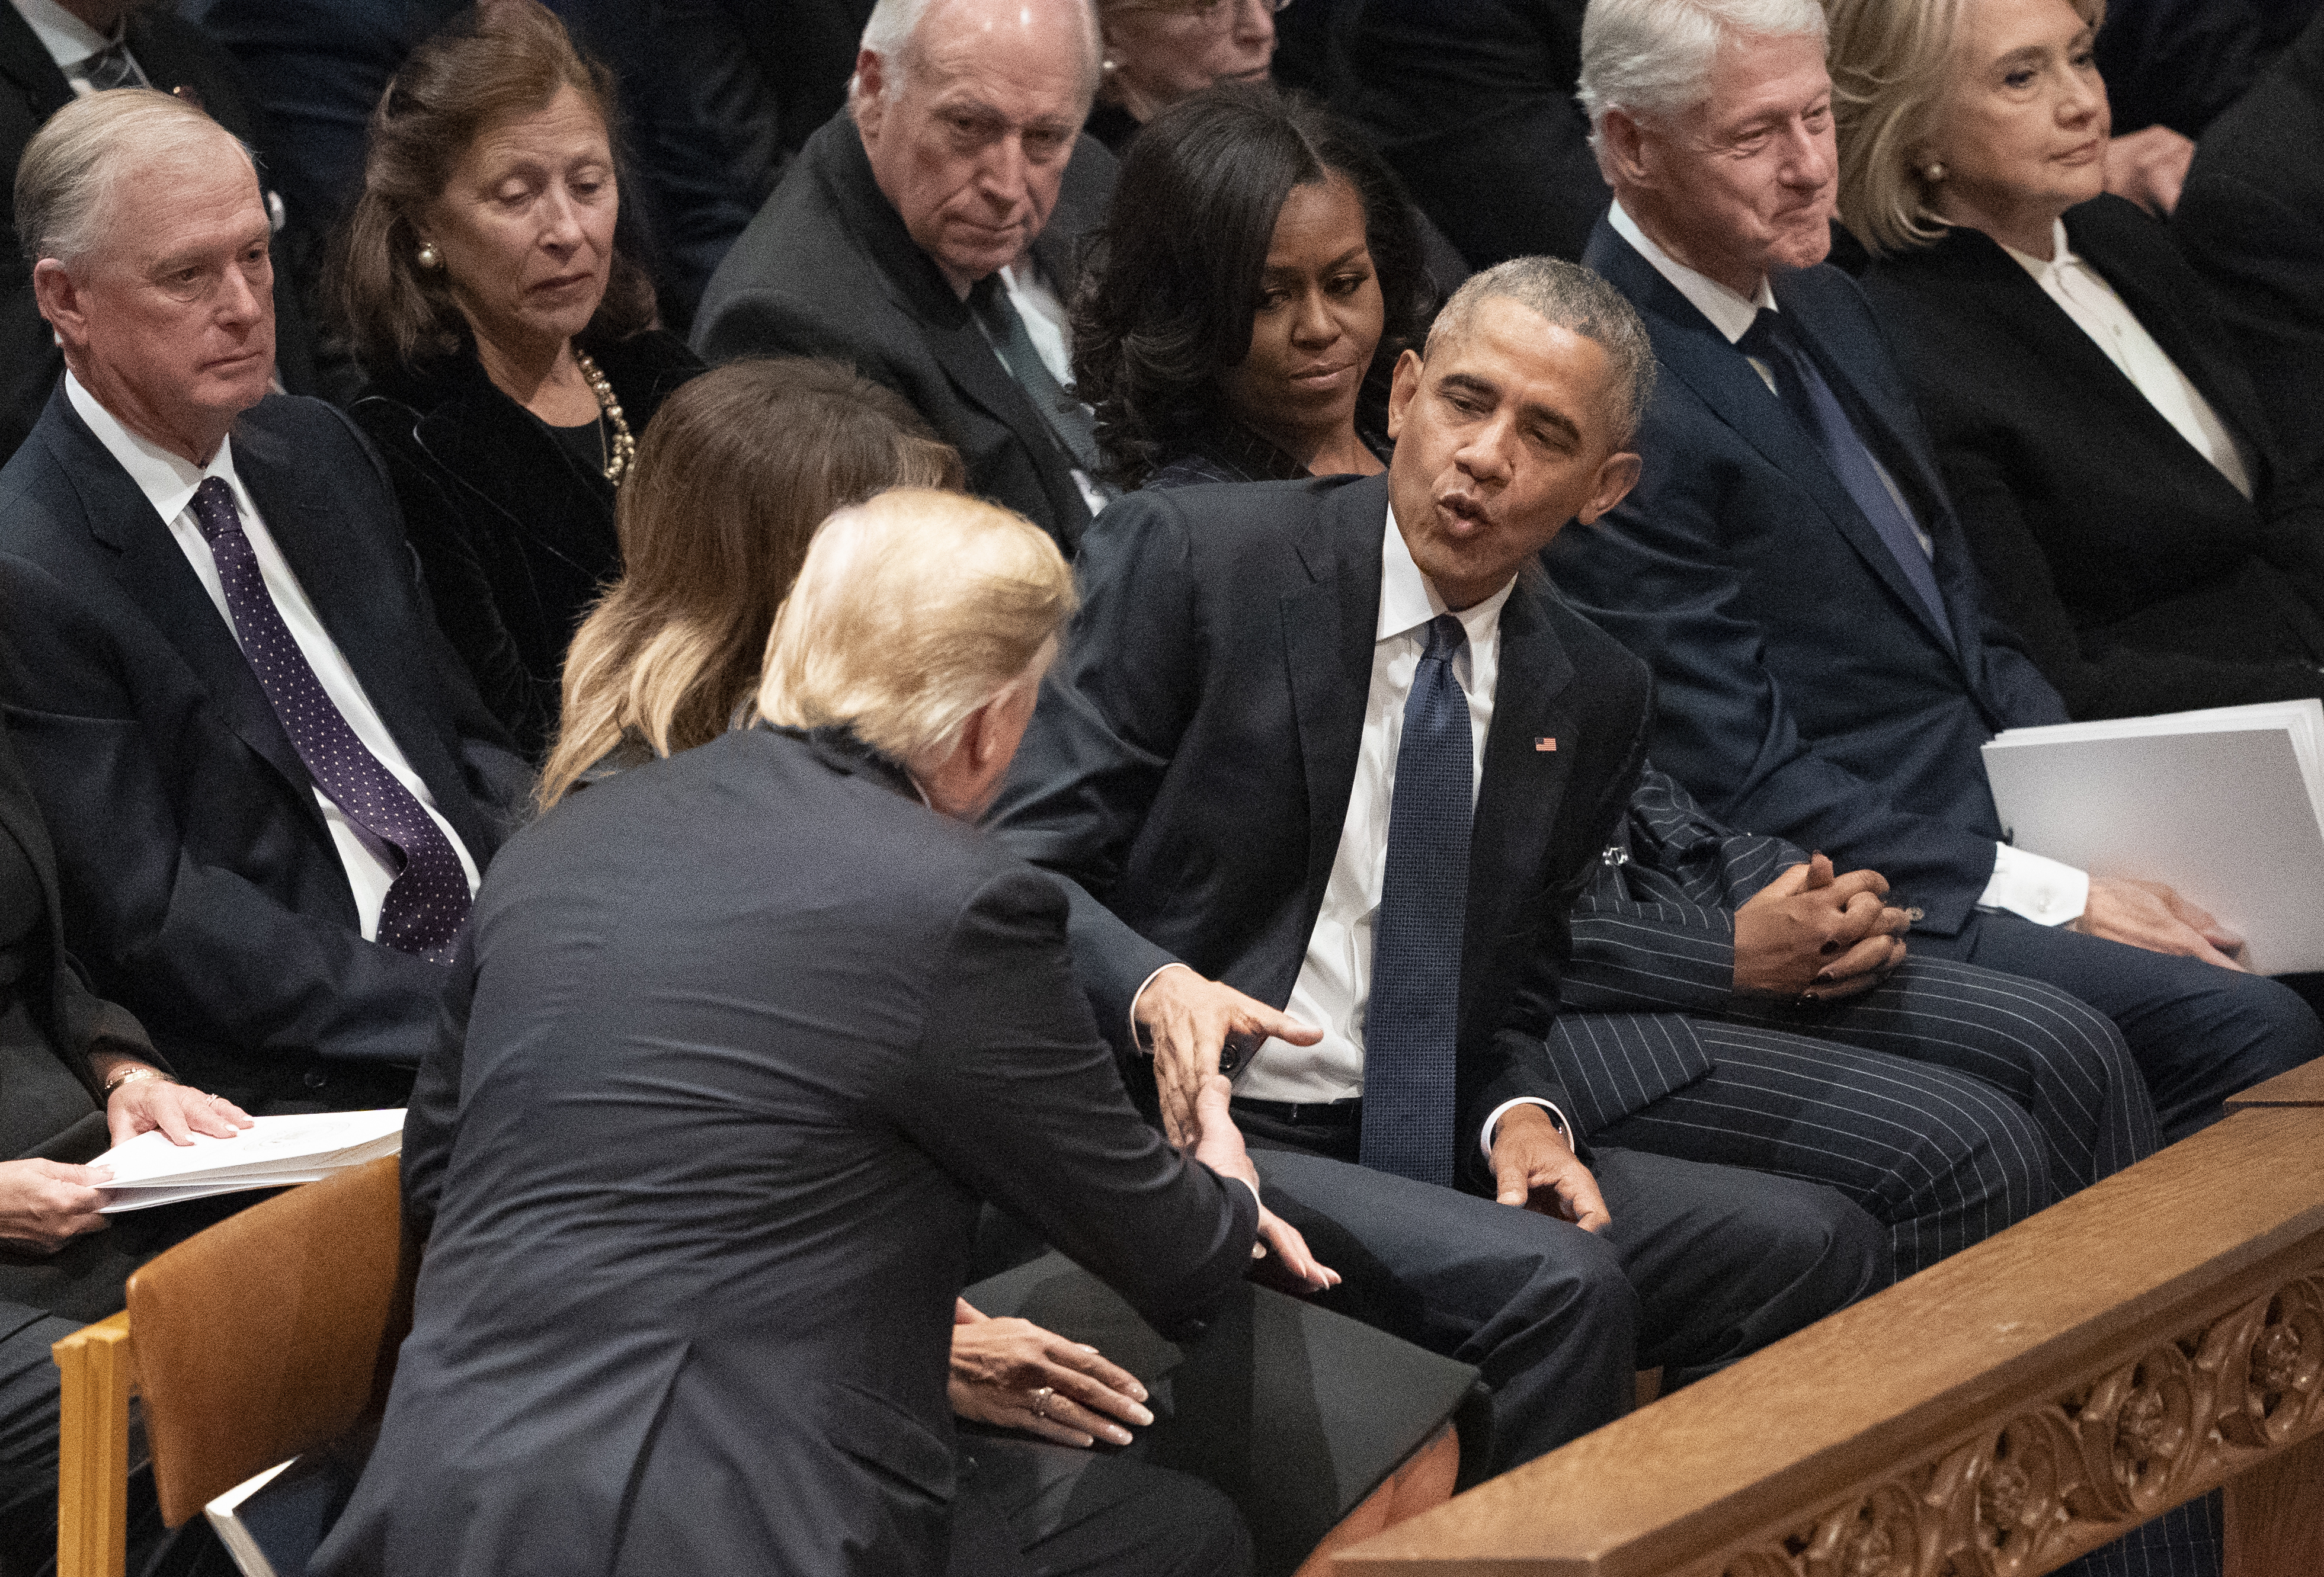 President Donald Trump shakes hands with former president Barack Obama during a state funeral service for former president George HW Bush